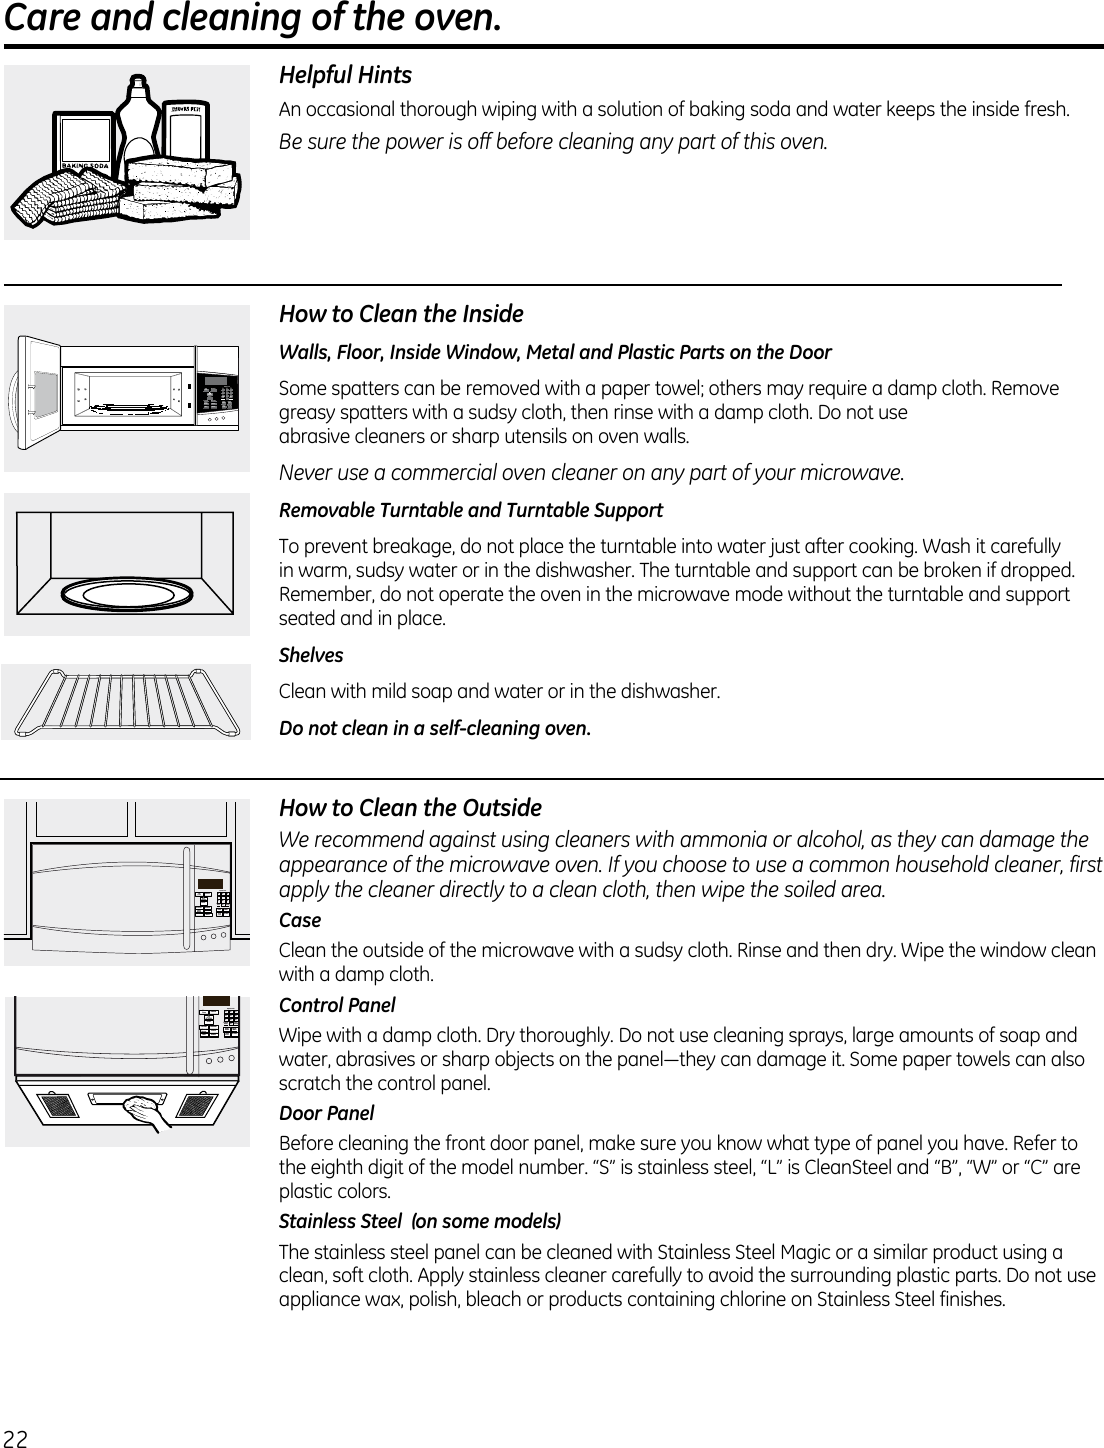 22 Care and cleaning of the oven.                                             Helpful HintsAn  occasional thorough wiping with a solution of baking soda and water keeps the inside fresh.Be sure the power is off before cleaning any part of this oven.How to Clean the InsideWalls, Floor, Inside Window, Metal and Plastic Parts on the DoorSome spatters can be removed with a paper towel; others may require a damp cloth. Remove greasy spatters with a sudsy cloth, then rinse with a damp cloth. Do not use  abrasive cleaners or sharp utensils on oven walls. Never use a commercial oven cleaner on any part of your microwave.Removable Turntable and Turntable Support To prevent breakage, do not place the turntable into water just after cooking. Wash it carefully in warm, sudsy water or in the dishwasher. The turntable and support can be broken if dropped. Remember, do not operate the oven in the microwave mode without the turntable and support seated and in place.ShelvesClean with mild soap and water or in the dishwasher.Do not clean in a self-cleaning oven.How to Clean the OutsideWe recommend against using cleaners with ammonia or alcohol, as they can damage the appearance of the microwave oven. If you choose to use a common household cleaner, first apply the cleaner directly to a clean cloth, then wipe the soiled area.CaseClean the outside of the microwave with a sudsy cloth. Rinse and then dry. Wipe the window clean with a damp cloth. Control PanelWipe with a damp cloth. Dry thoroughly. Do not use cleaning sprays, large amounts of soap and water,abrasivesorsharpobjectsonthepanel—theycandamageit.Somepapertowelscanalsoscratch the control panel.Door PanelBefore cleaning the front door panel, make sure you know what type of panel you have. Refer to the eighth digit of the model number. “S” is stainless steel, “L” is CleanSteel and “B”, “W” or “C” are plastic colors.Stainless Steel  (on some models)The stainless steel panel can be cleaned with Stainless Steel Magic or a similar product using a clean, soft cloth. Apply stainless cleaner carefully to avoid the surrounding plastic parts. Do not use appliance wax, polish, bleach or products containing chlorine on Stainless Steel finishes. 21 354 687 90ADD30 SECPOWERLEVELExpress CookSTARTPAUSECANCELOFFSETTINGSTIMERon/offTIMECOOK DEFROSTSTEAMPOPCORN BEVERAGEFAMILYSNACKS POTATOMELT REHEAT21 354 687 90ADD30 SECPOWERLEVELExpress CookSTARTPAUSECANCELOFFSETTINGSTIMERon/offTIMECOOK DEFROSTSTEAMPOPCORN BEVERAGEFAMILYSNACKS POTATOMELT REHEAT21 354 687 90ADD30 SECPOWERLEVELExpress CookSTARTPAUSECANCELOFFSETTINGSTIMERon/offTIMECOOKDEFROSTSTEAMPOPCORNBEVERAGEFAMILYSNACKSPOTATOMELTREHEAT